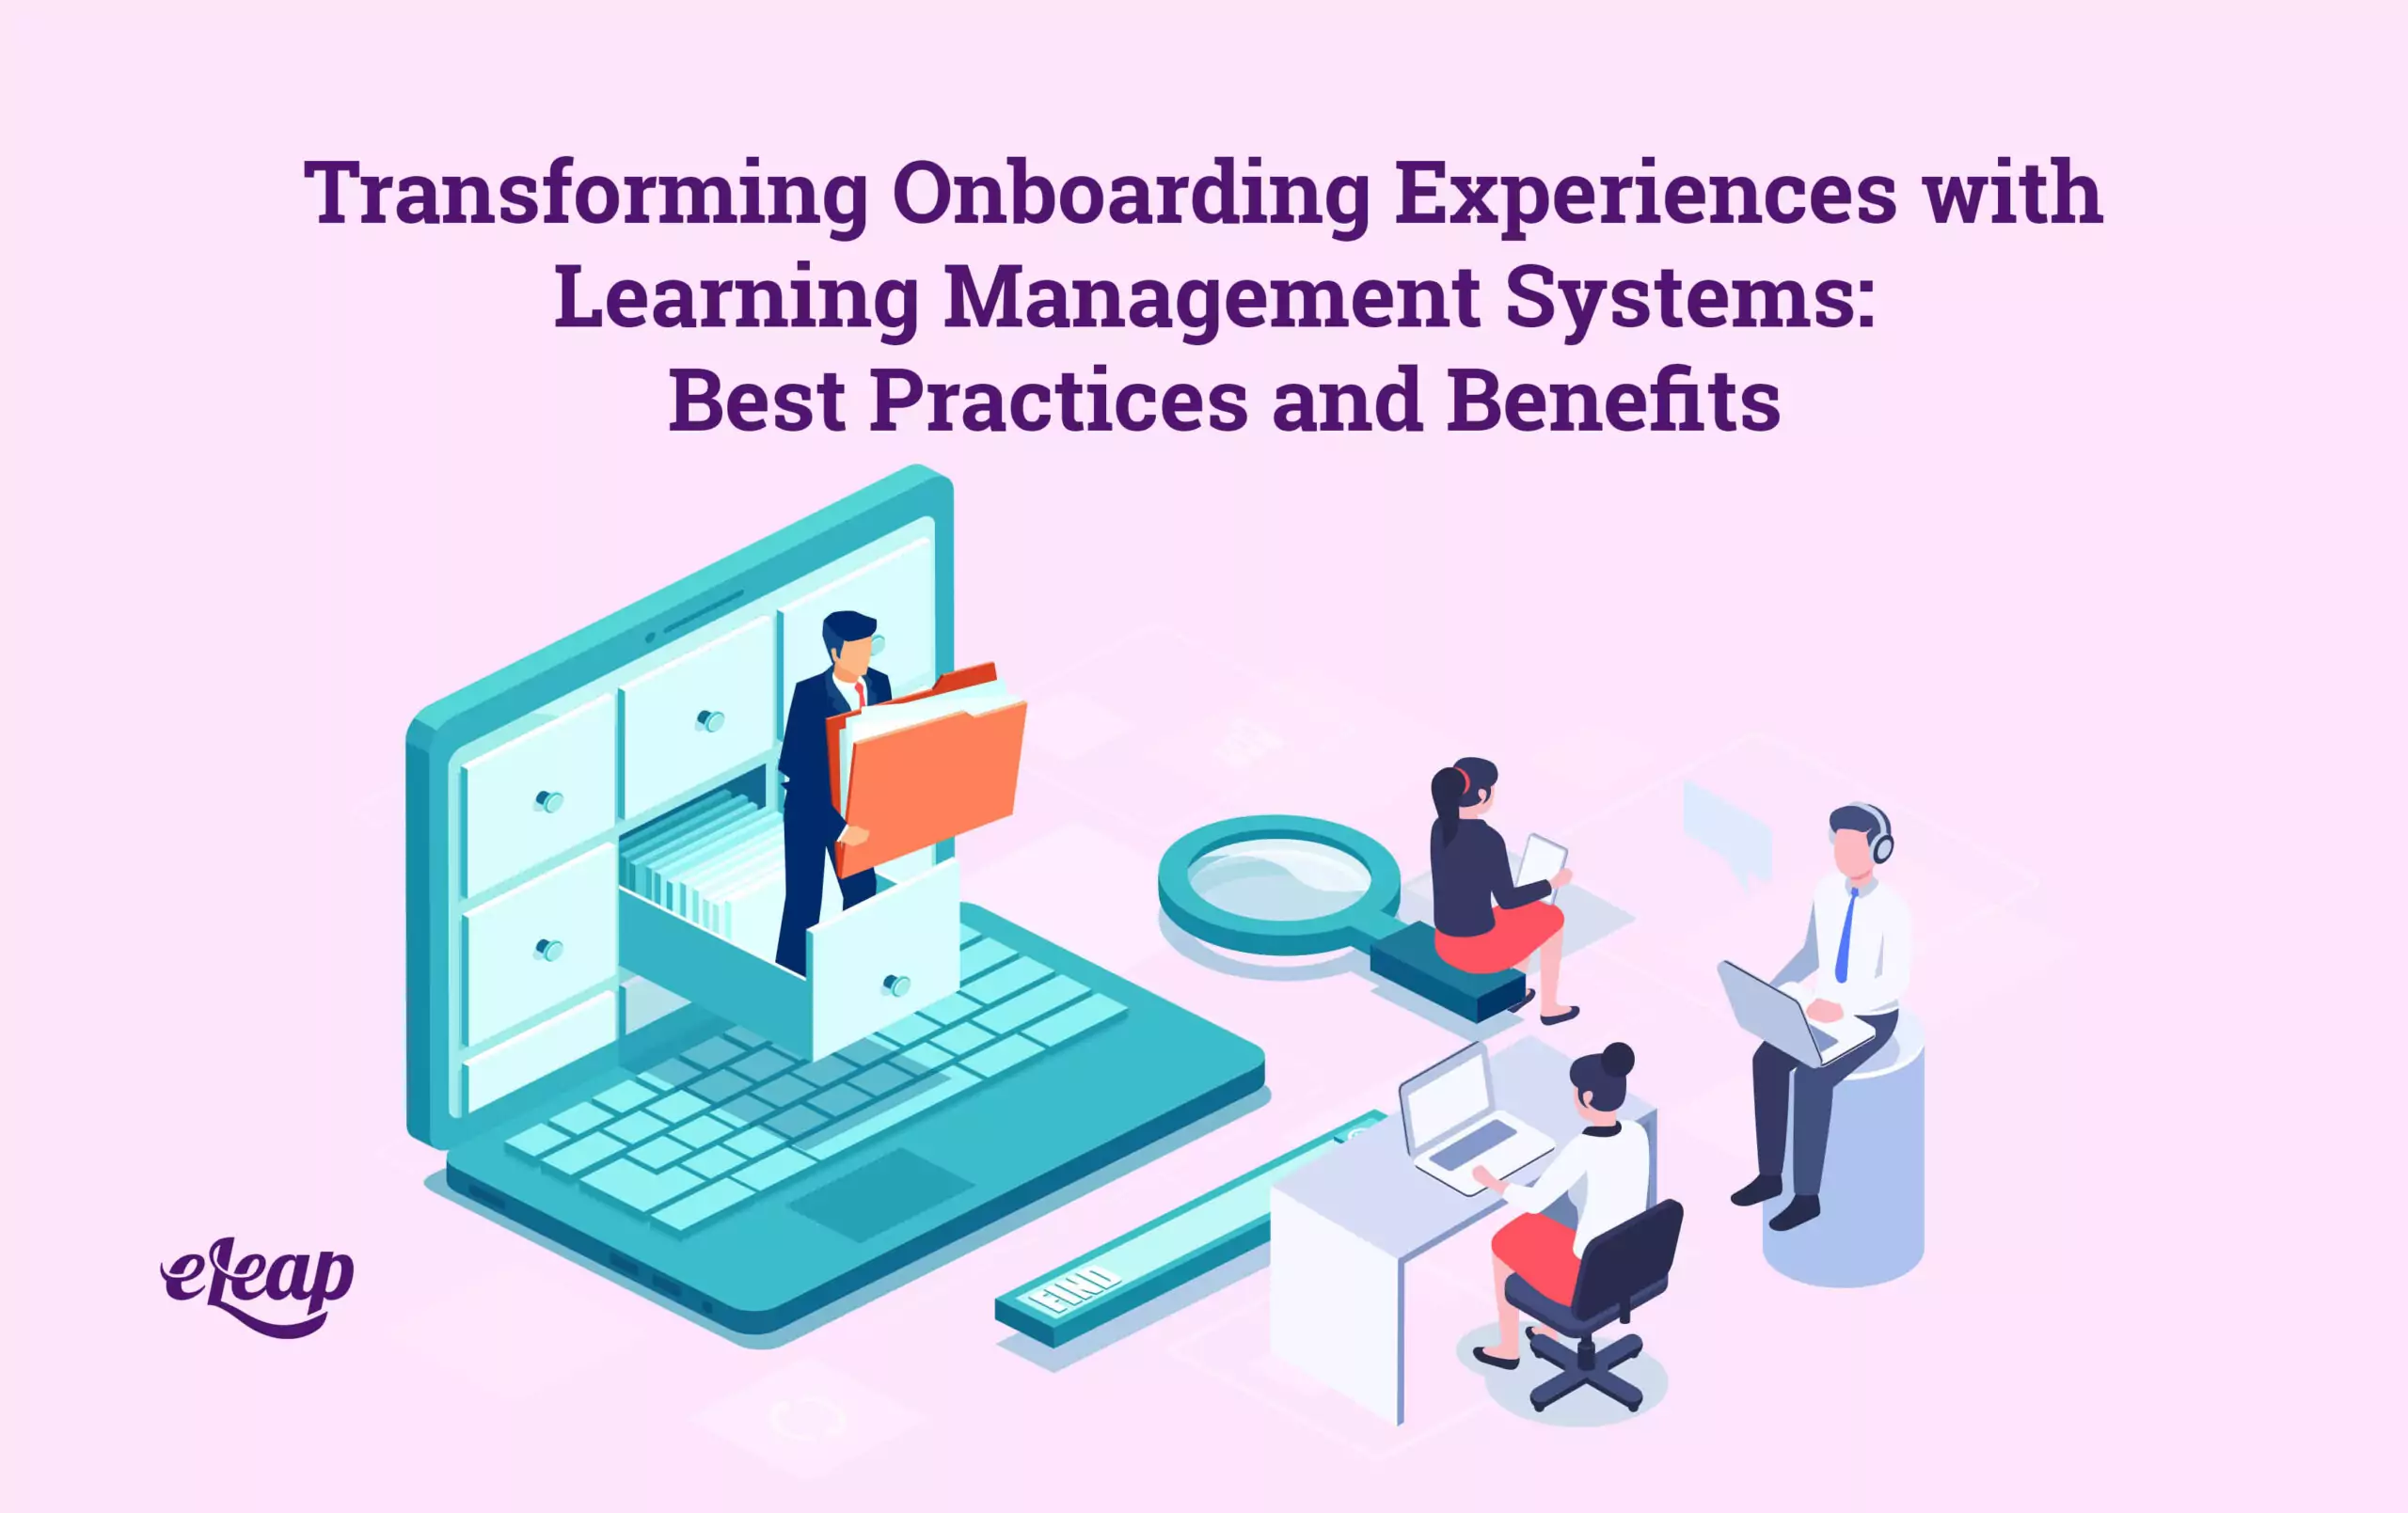 Transforming Onboarding Experiences with Learning Management Systems: Best Practices and Benefits